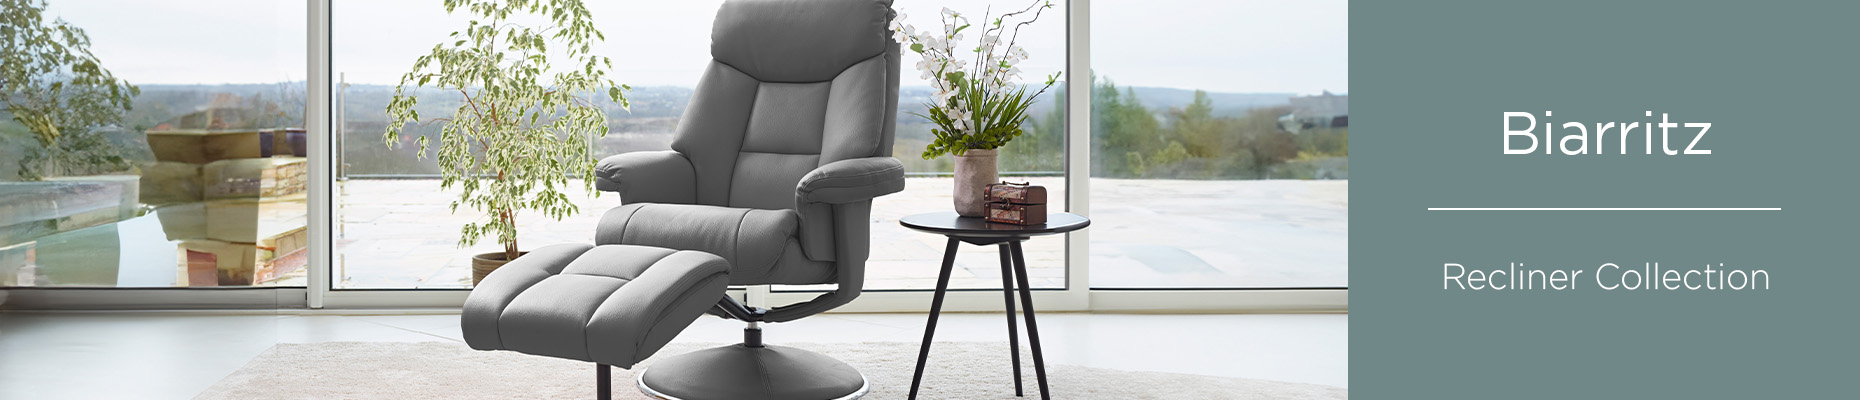 Biarritz Recliner Collection at Forrest Furnishing